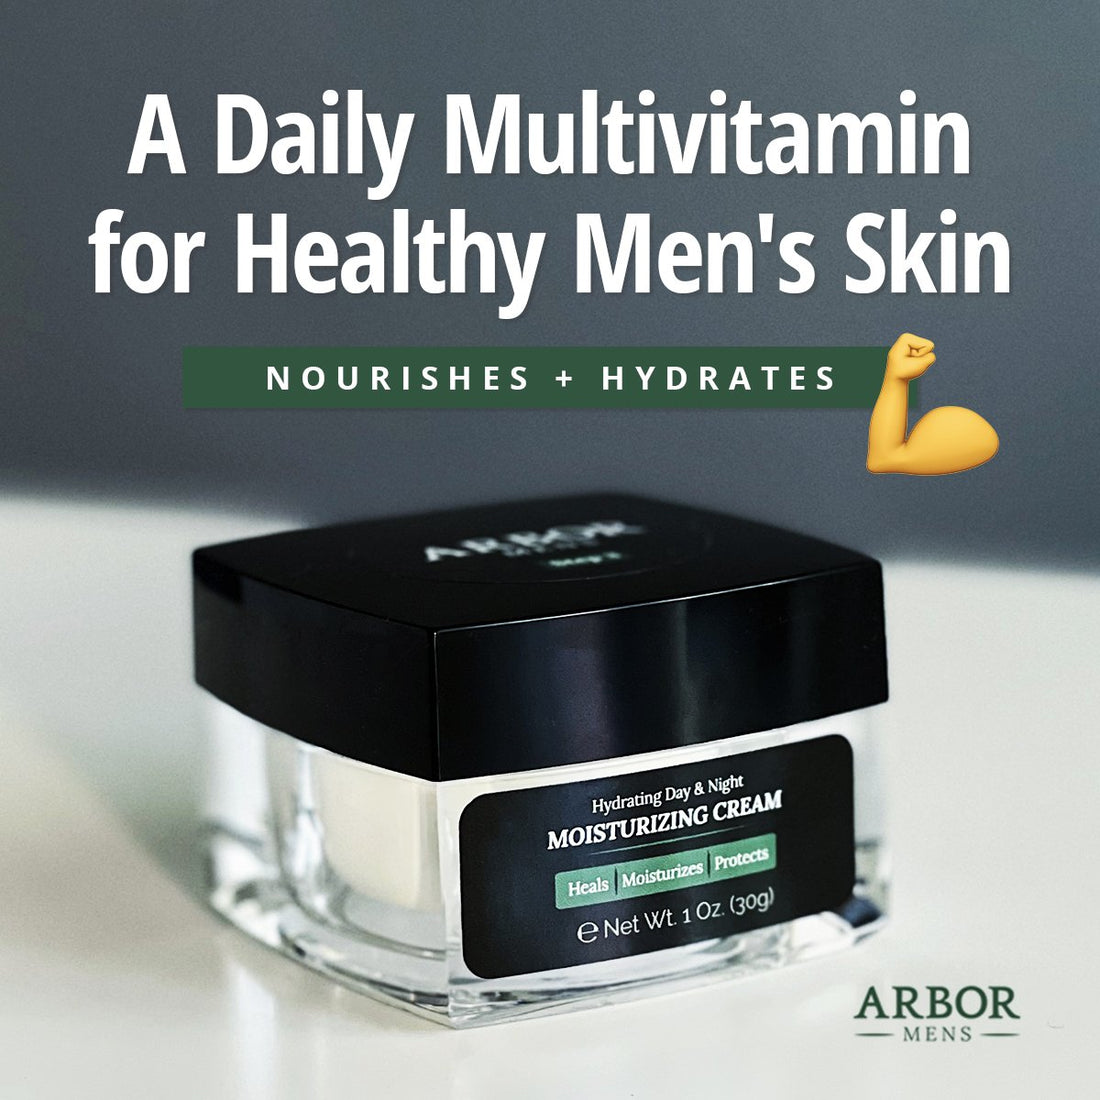 How to Use a Face Moisturizer For Men - Arbor Mens Hydrating Day and Night Moisturizing Cream